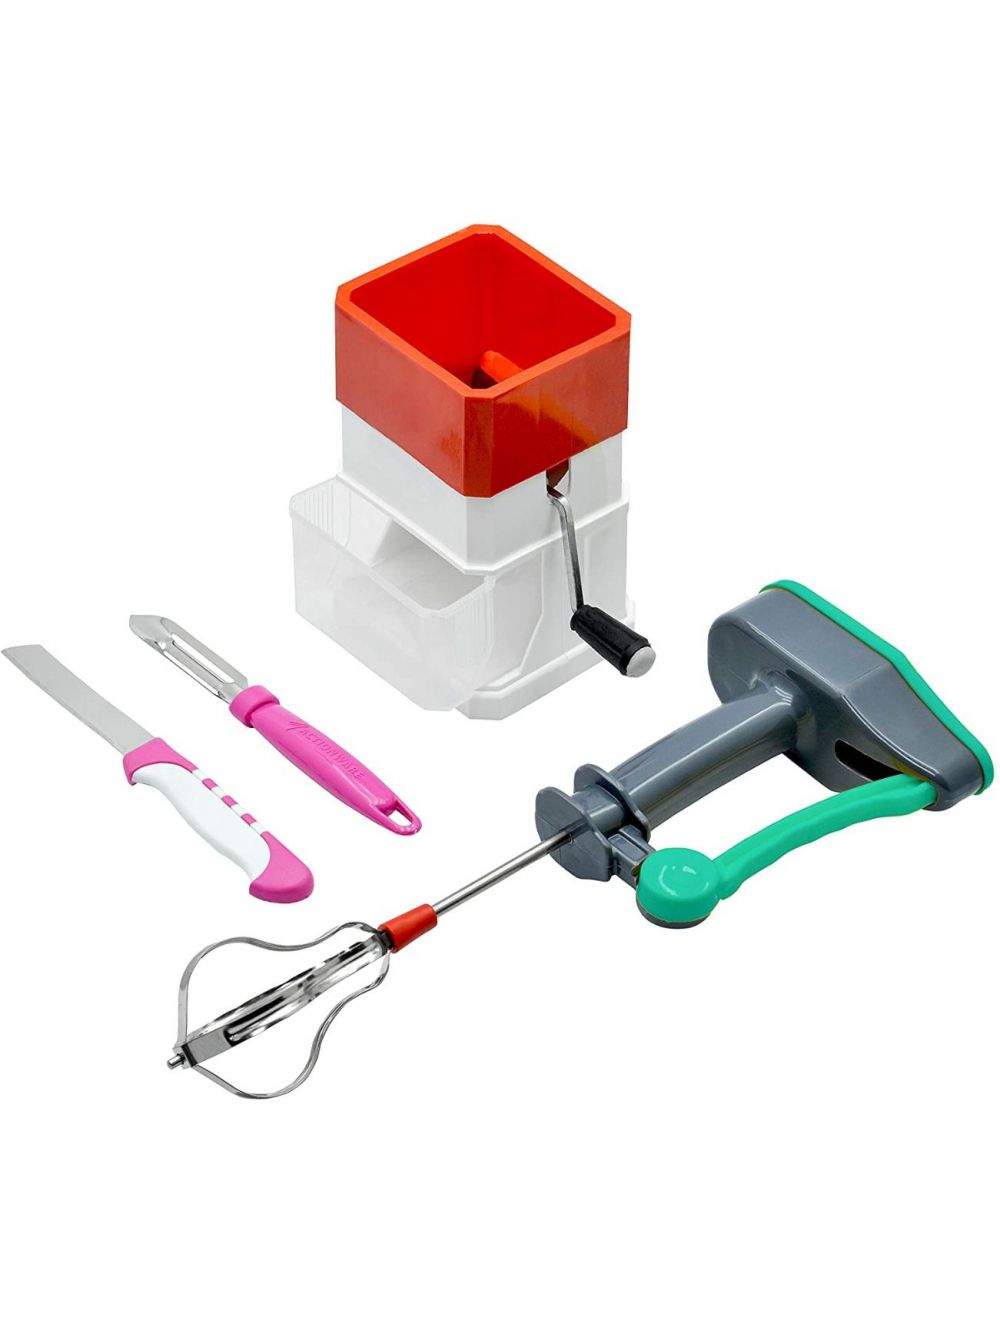 Action Kitchen Tool/Accessories Set of 4